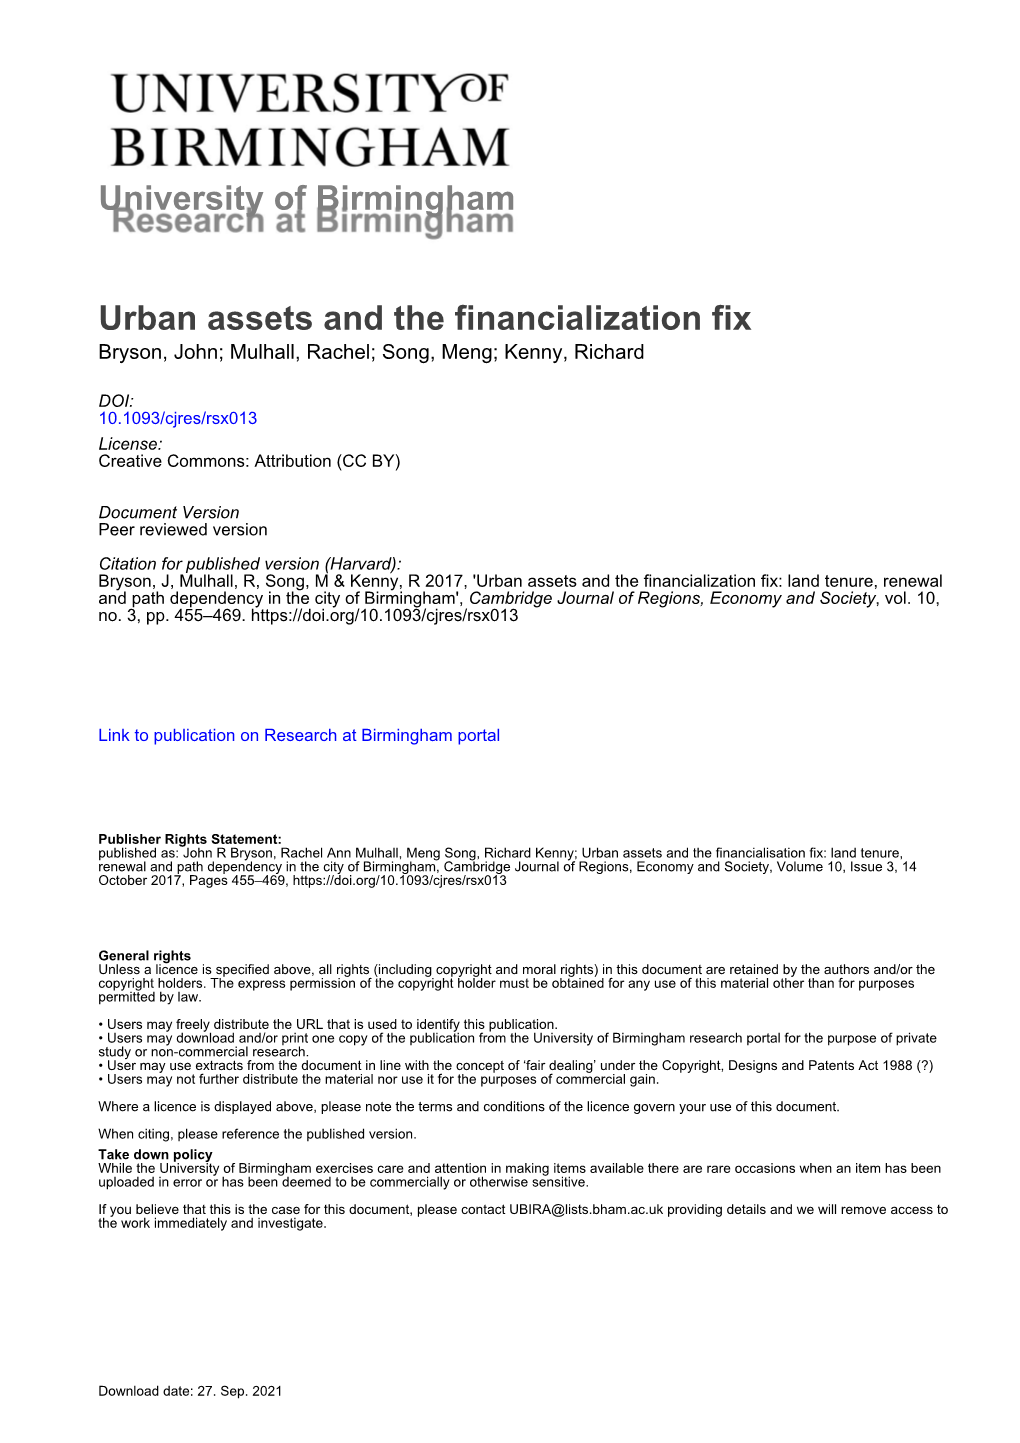 University of Birmingham Urban Assets and the Financialization